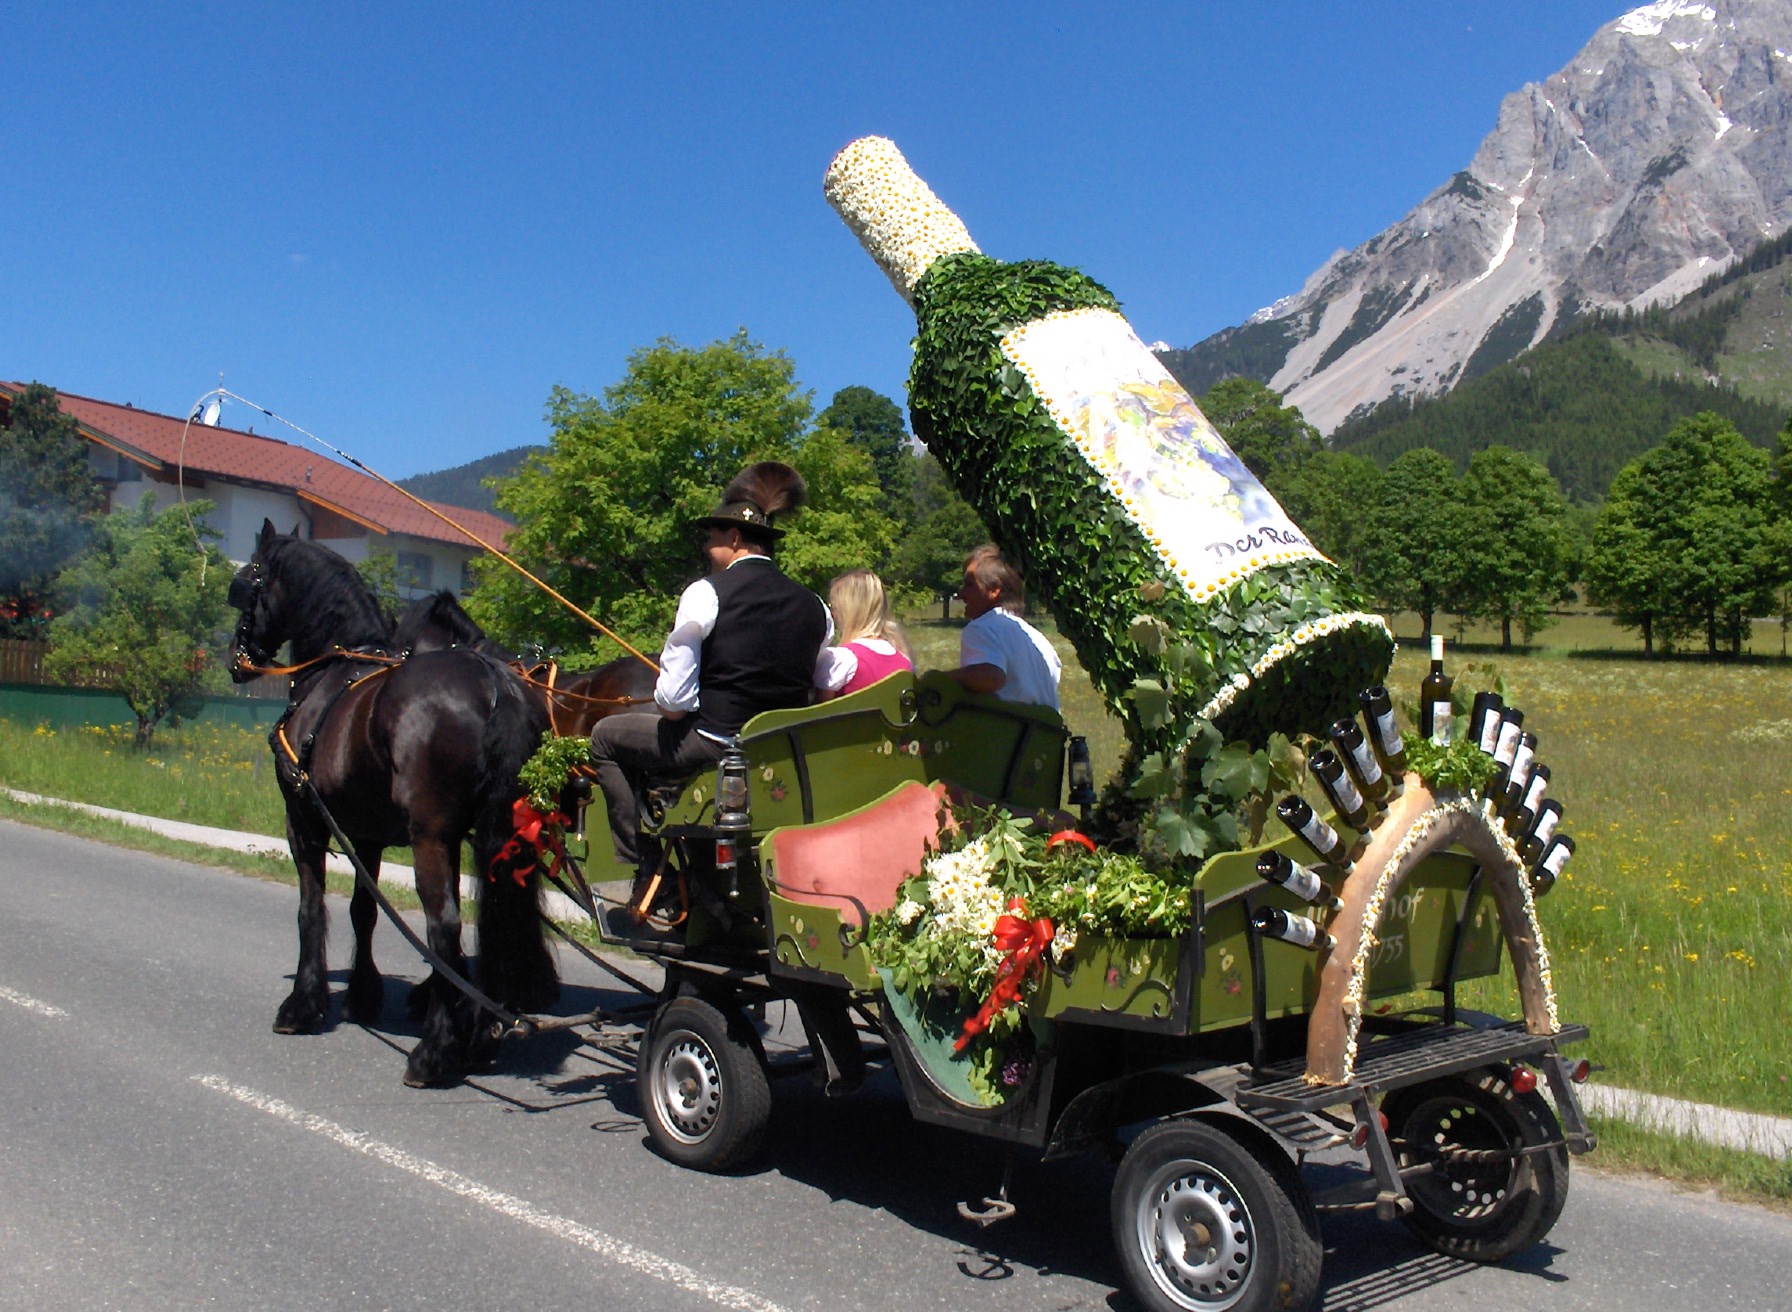 The Fruhlingsfest - annual traditional Ramsau festival in June